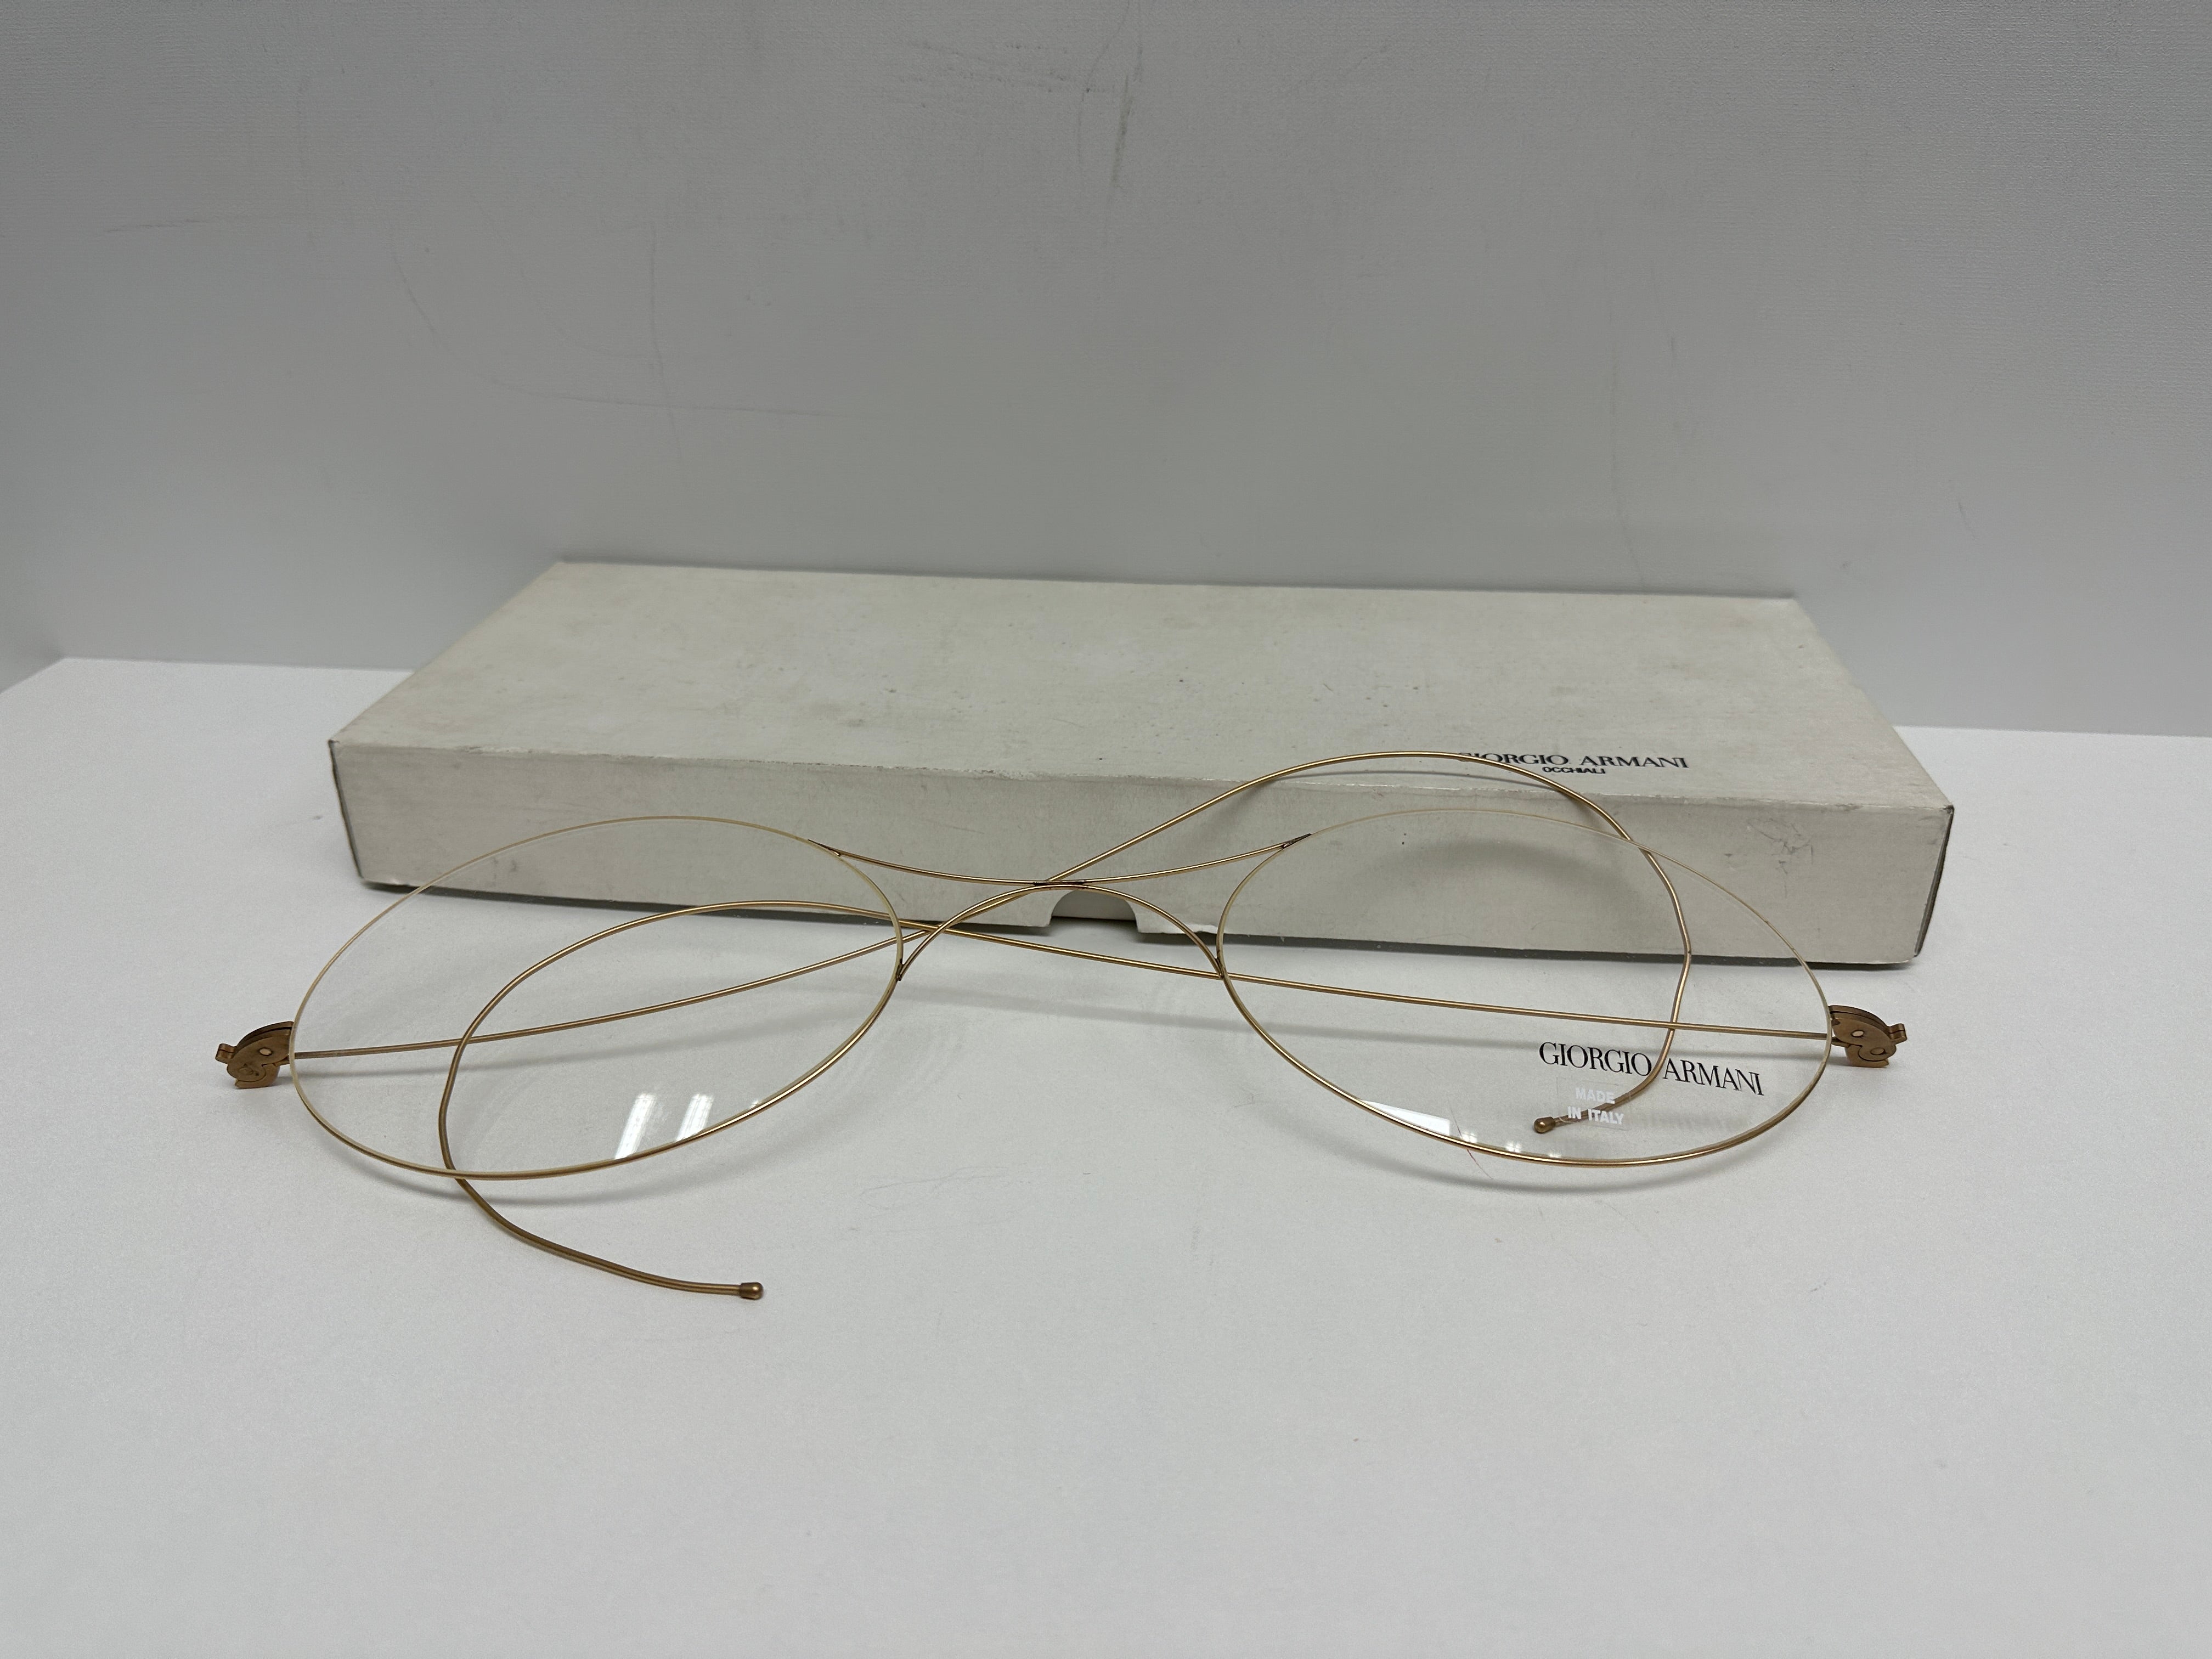 This is a rare and unique item! The Armani Eyeglasses Factic for display in a shop comes with its original cardboard packaging and is made of metal and glass. It's a coveted collector's item and a great addition to any Armani or eyewear collection.